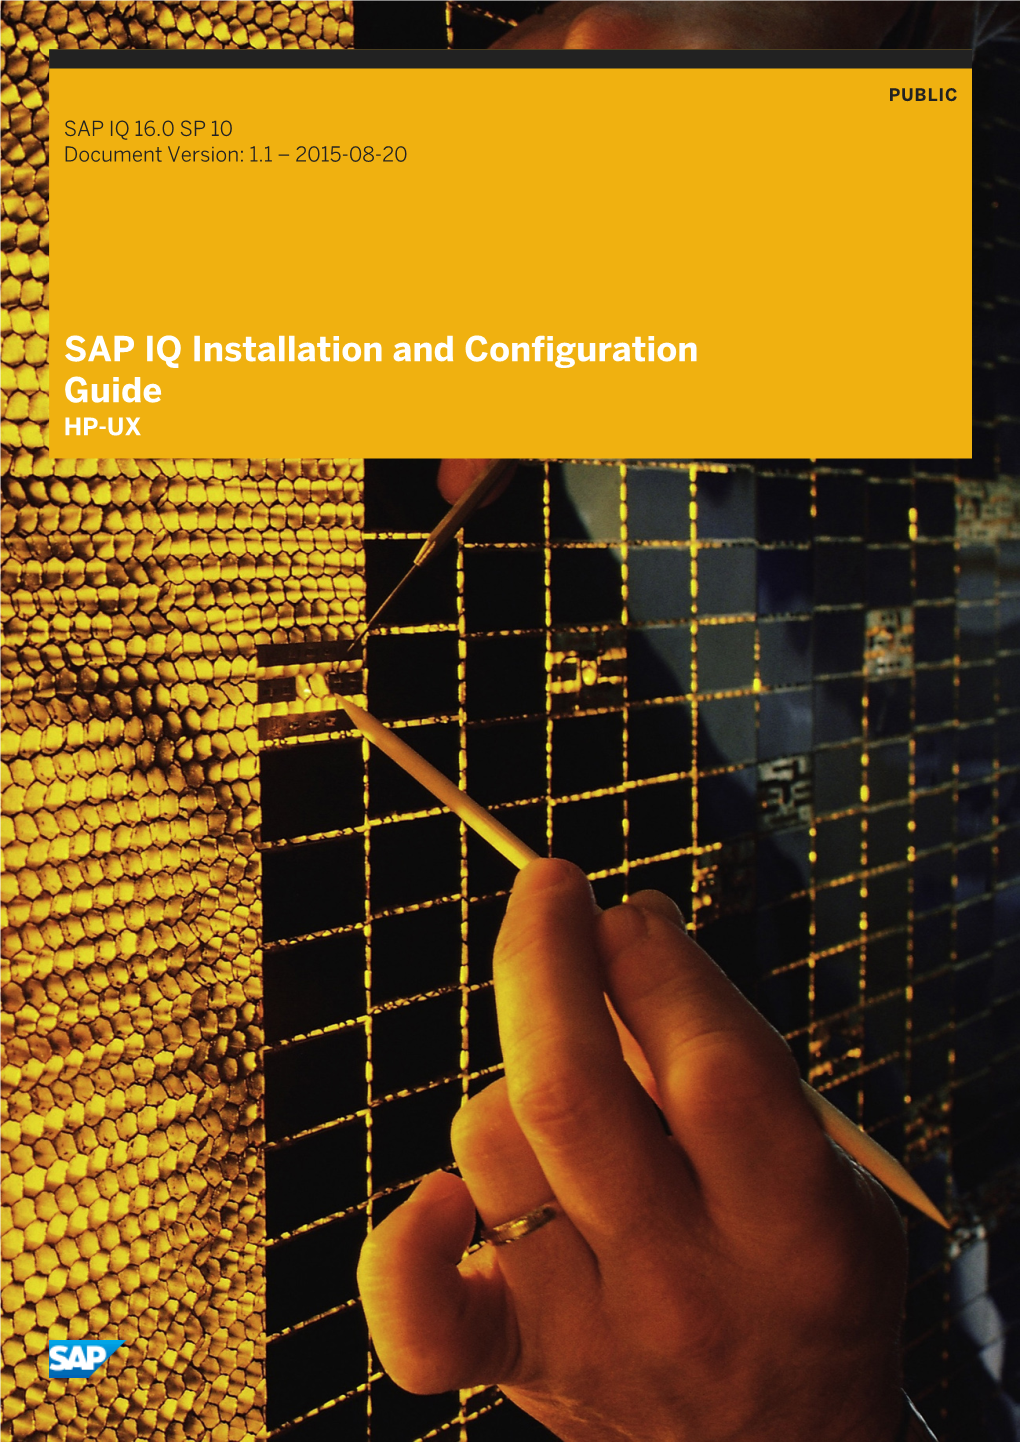 SAP IQ Installation and Configuration Guide HP-UX Content